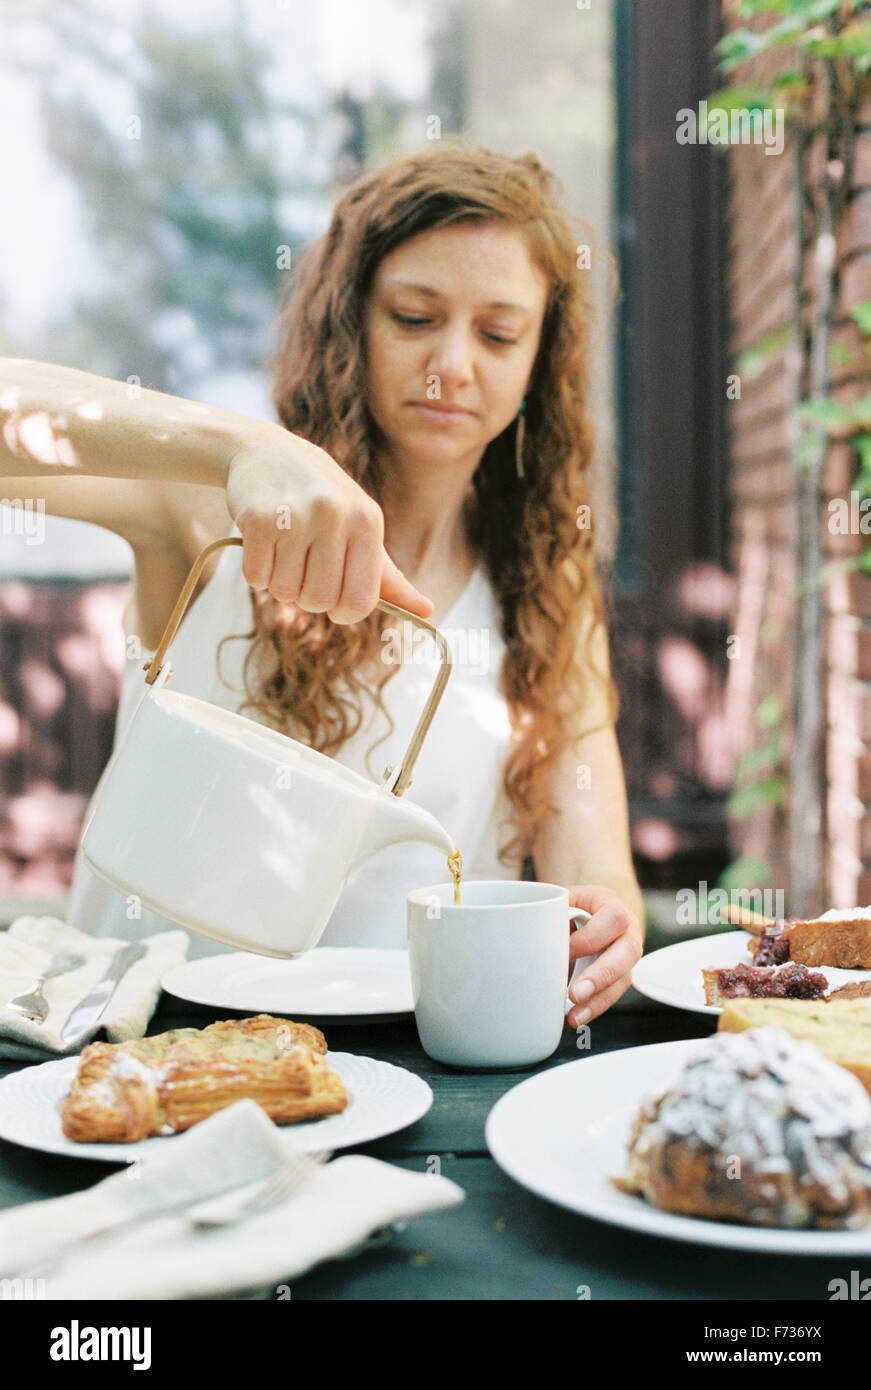 Woman pouring a cup of tea. Stock Photo